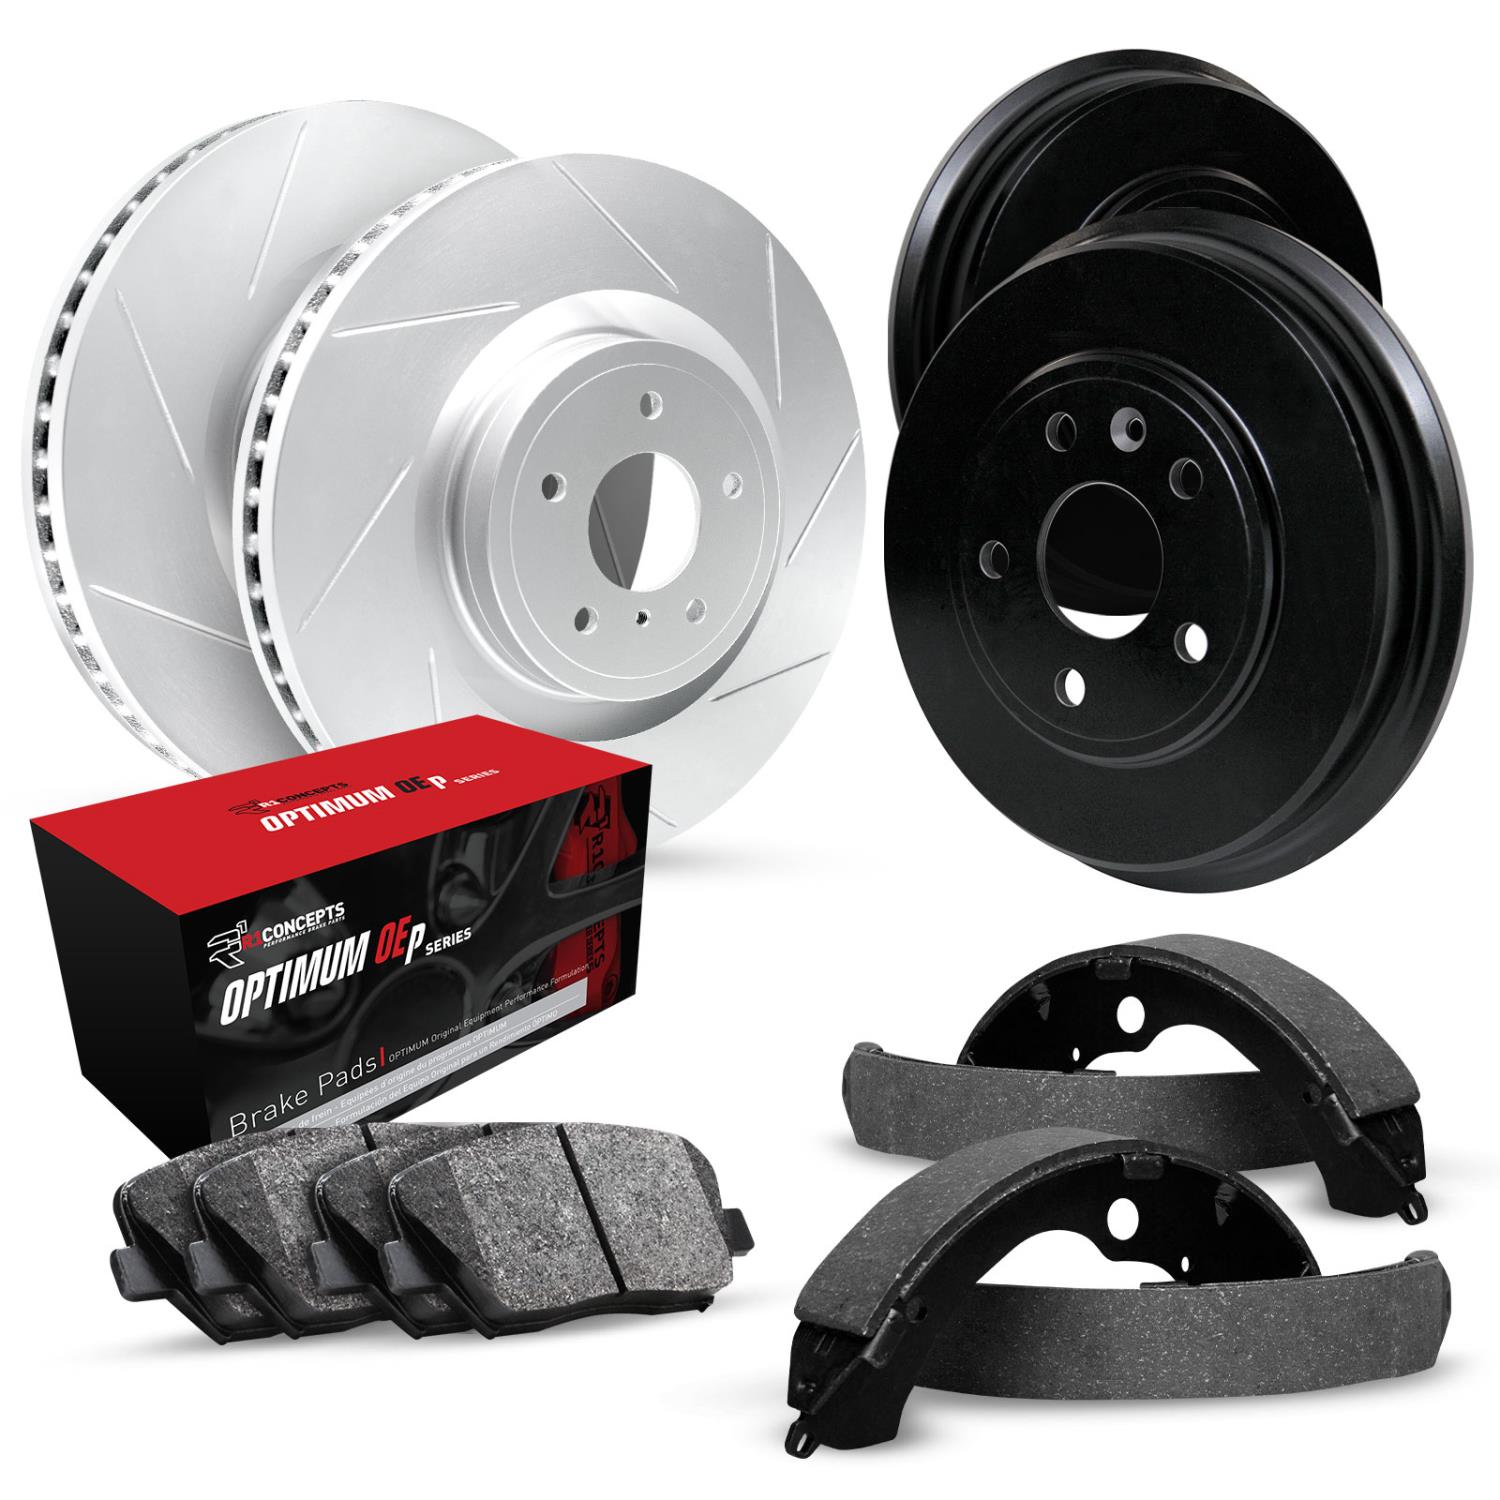 GEO-Carbon Slotted Brake Rotor & Drum Set w/Optimum OE Pads & Shoes, 1991-2002 GM, Position: Front & Rear